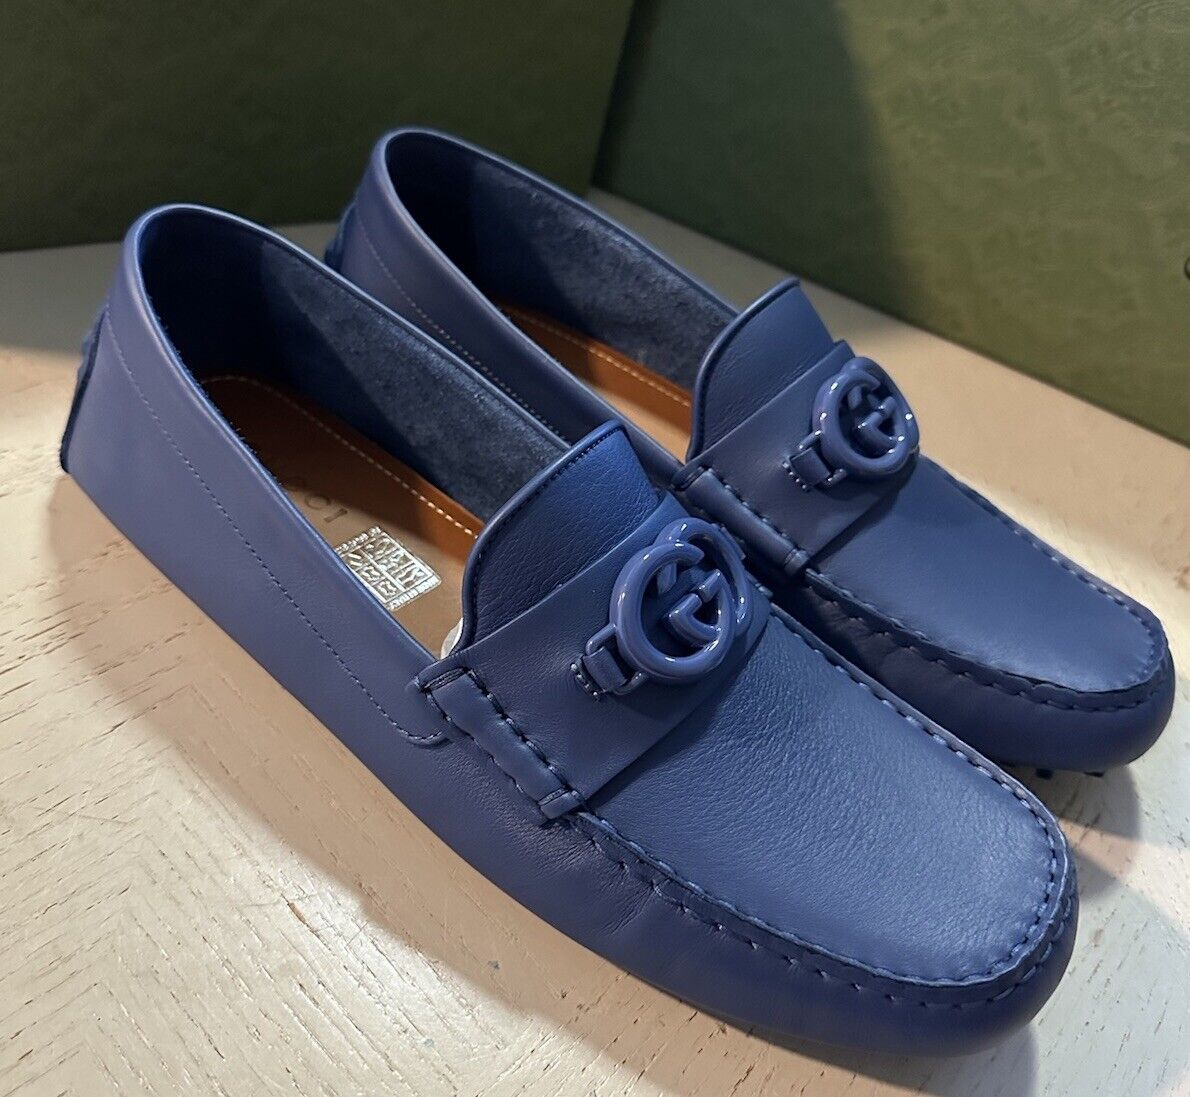 New Gucci Men Leather GG Driver Loafers Shoes Blue 14.5 US/14 UK 692379